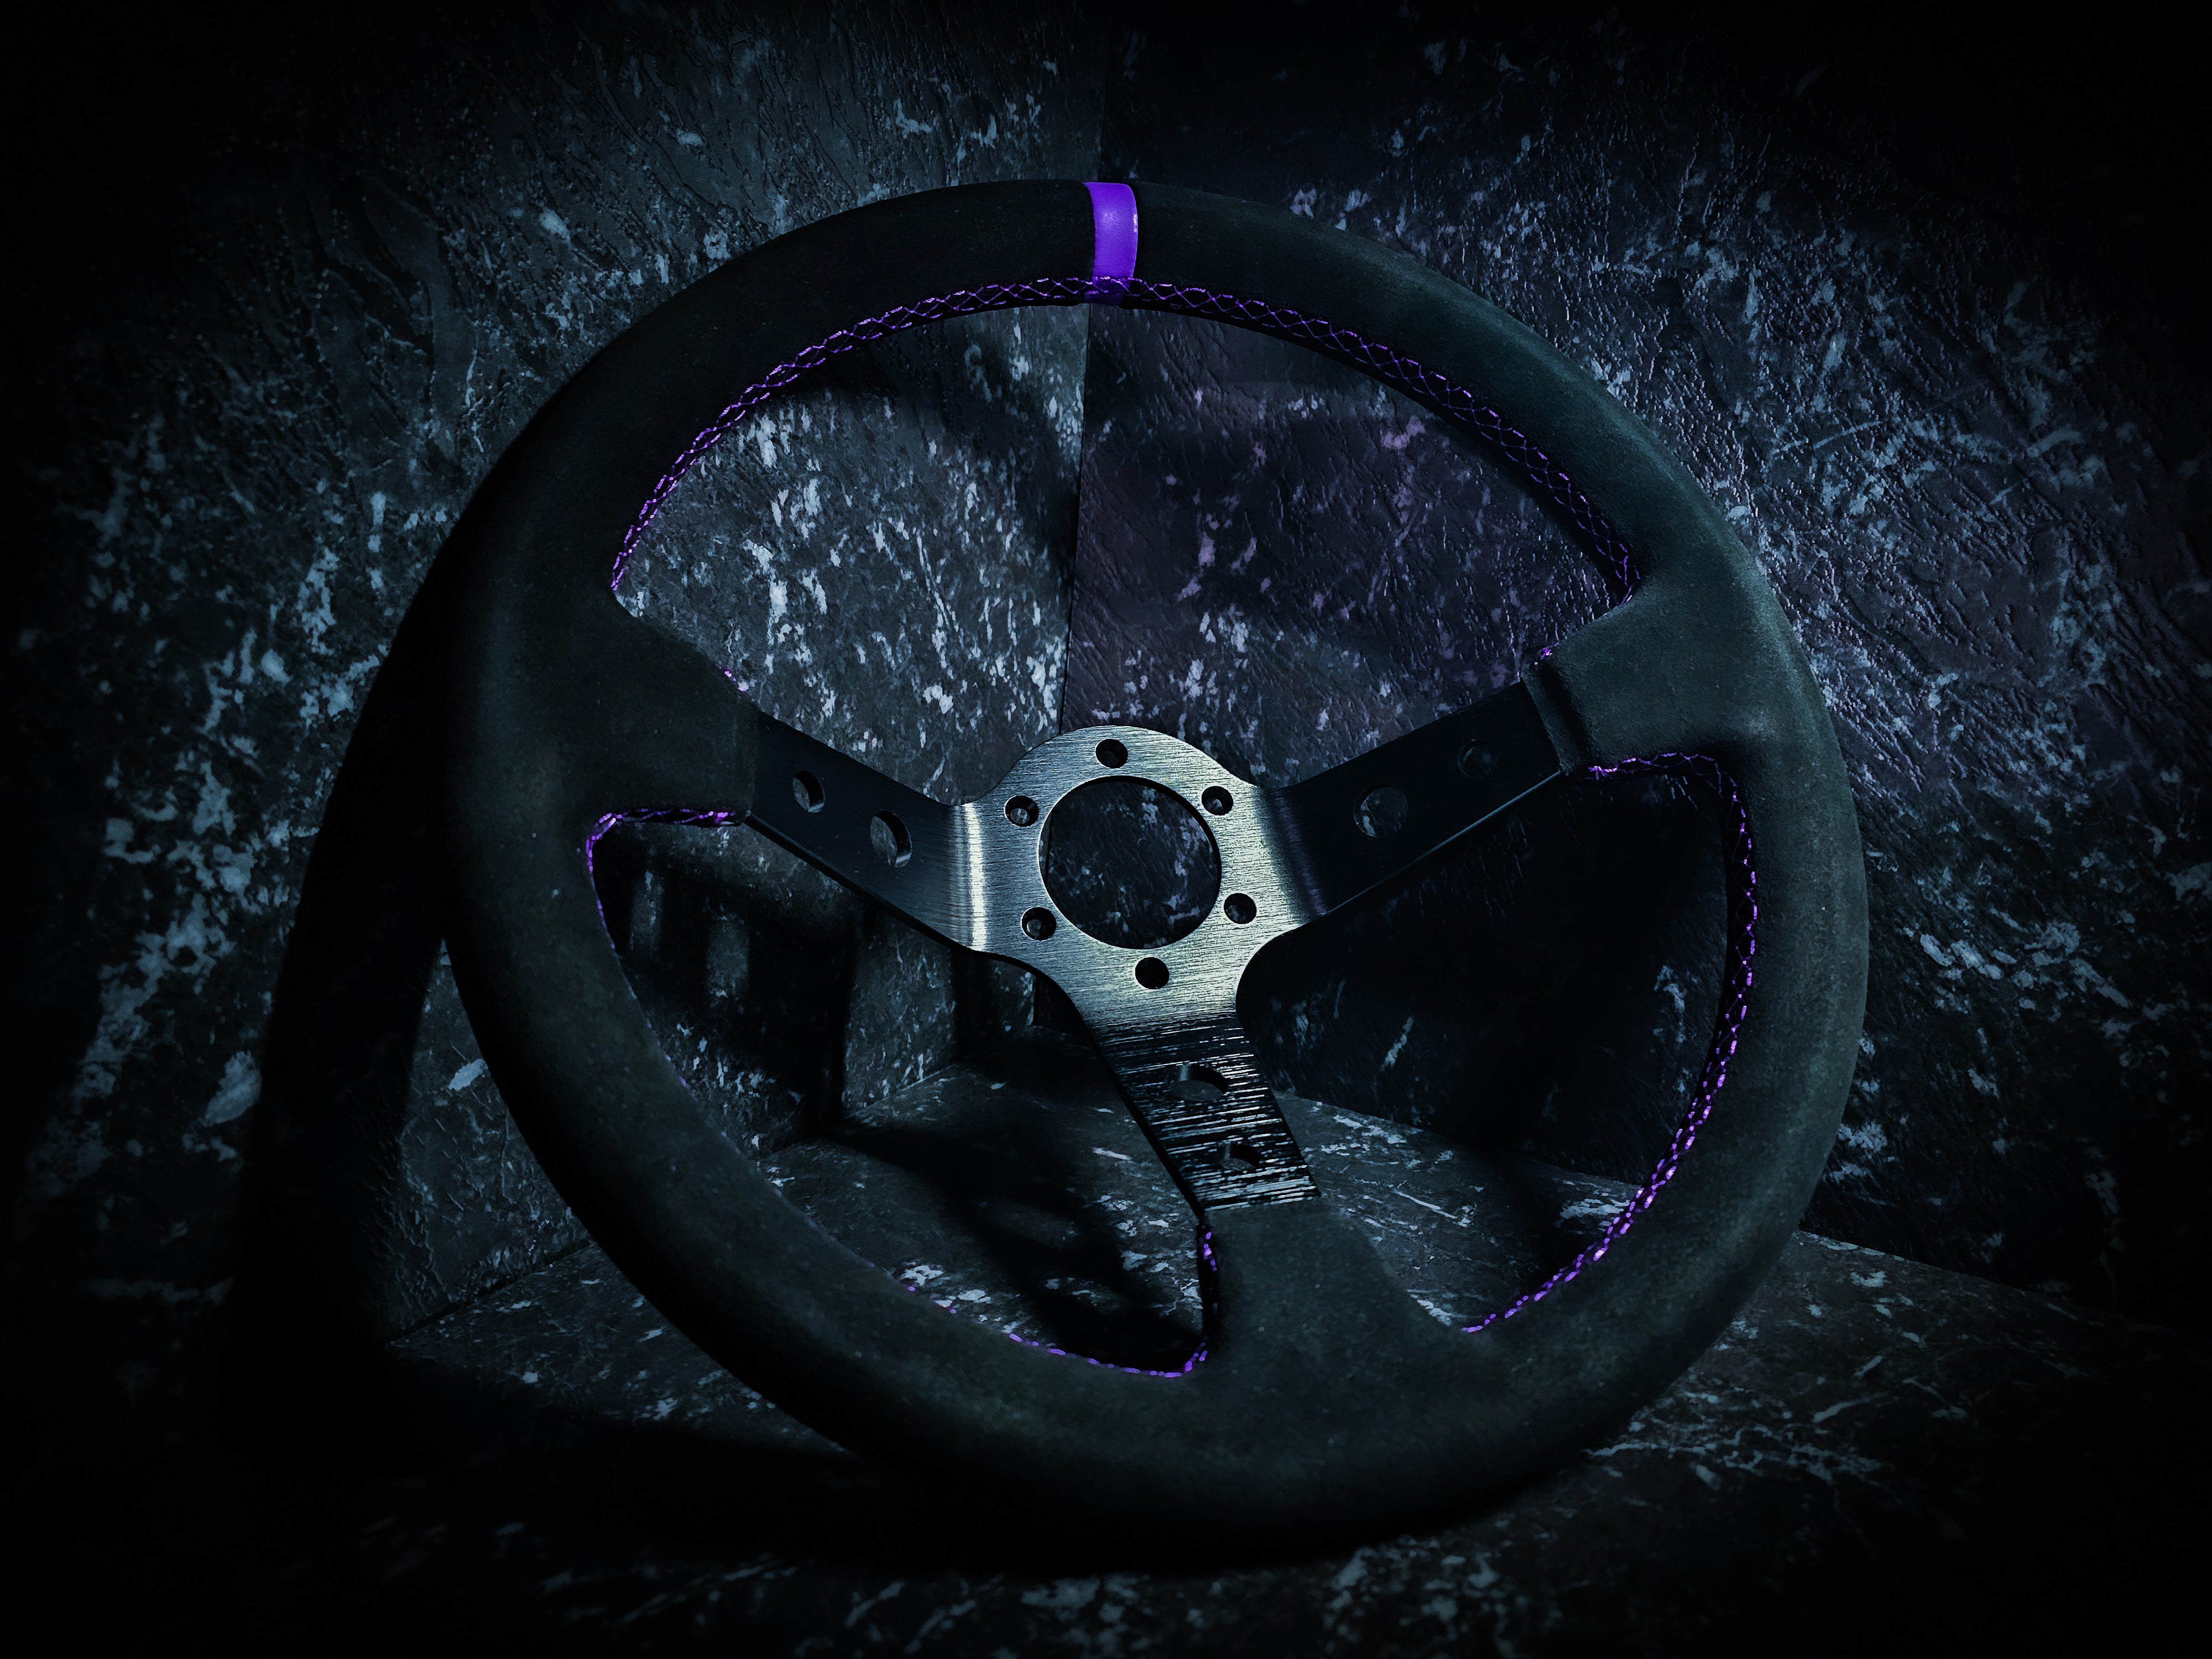 Double Purple and Black Deep Dished Suade Steering Wheel